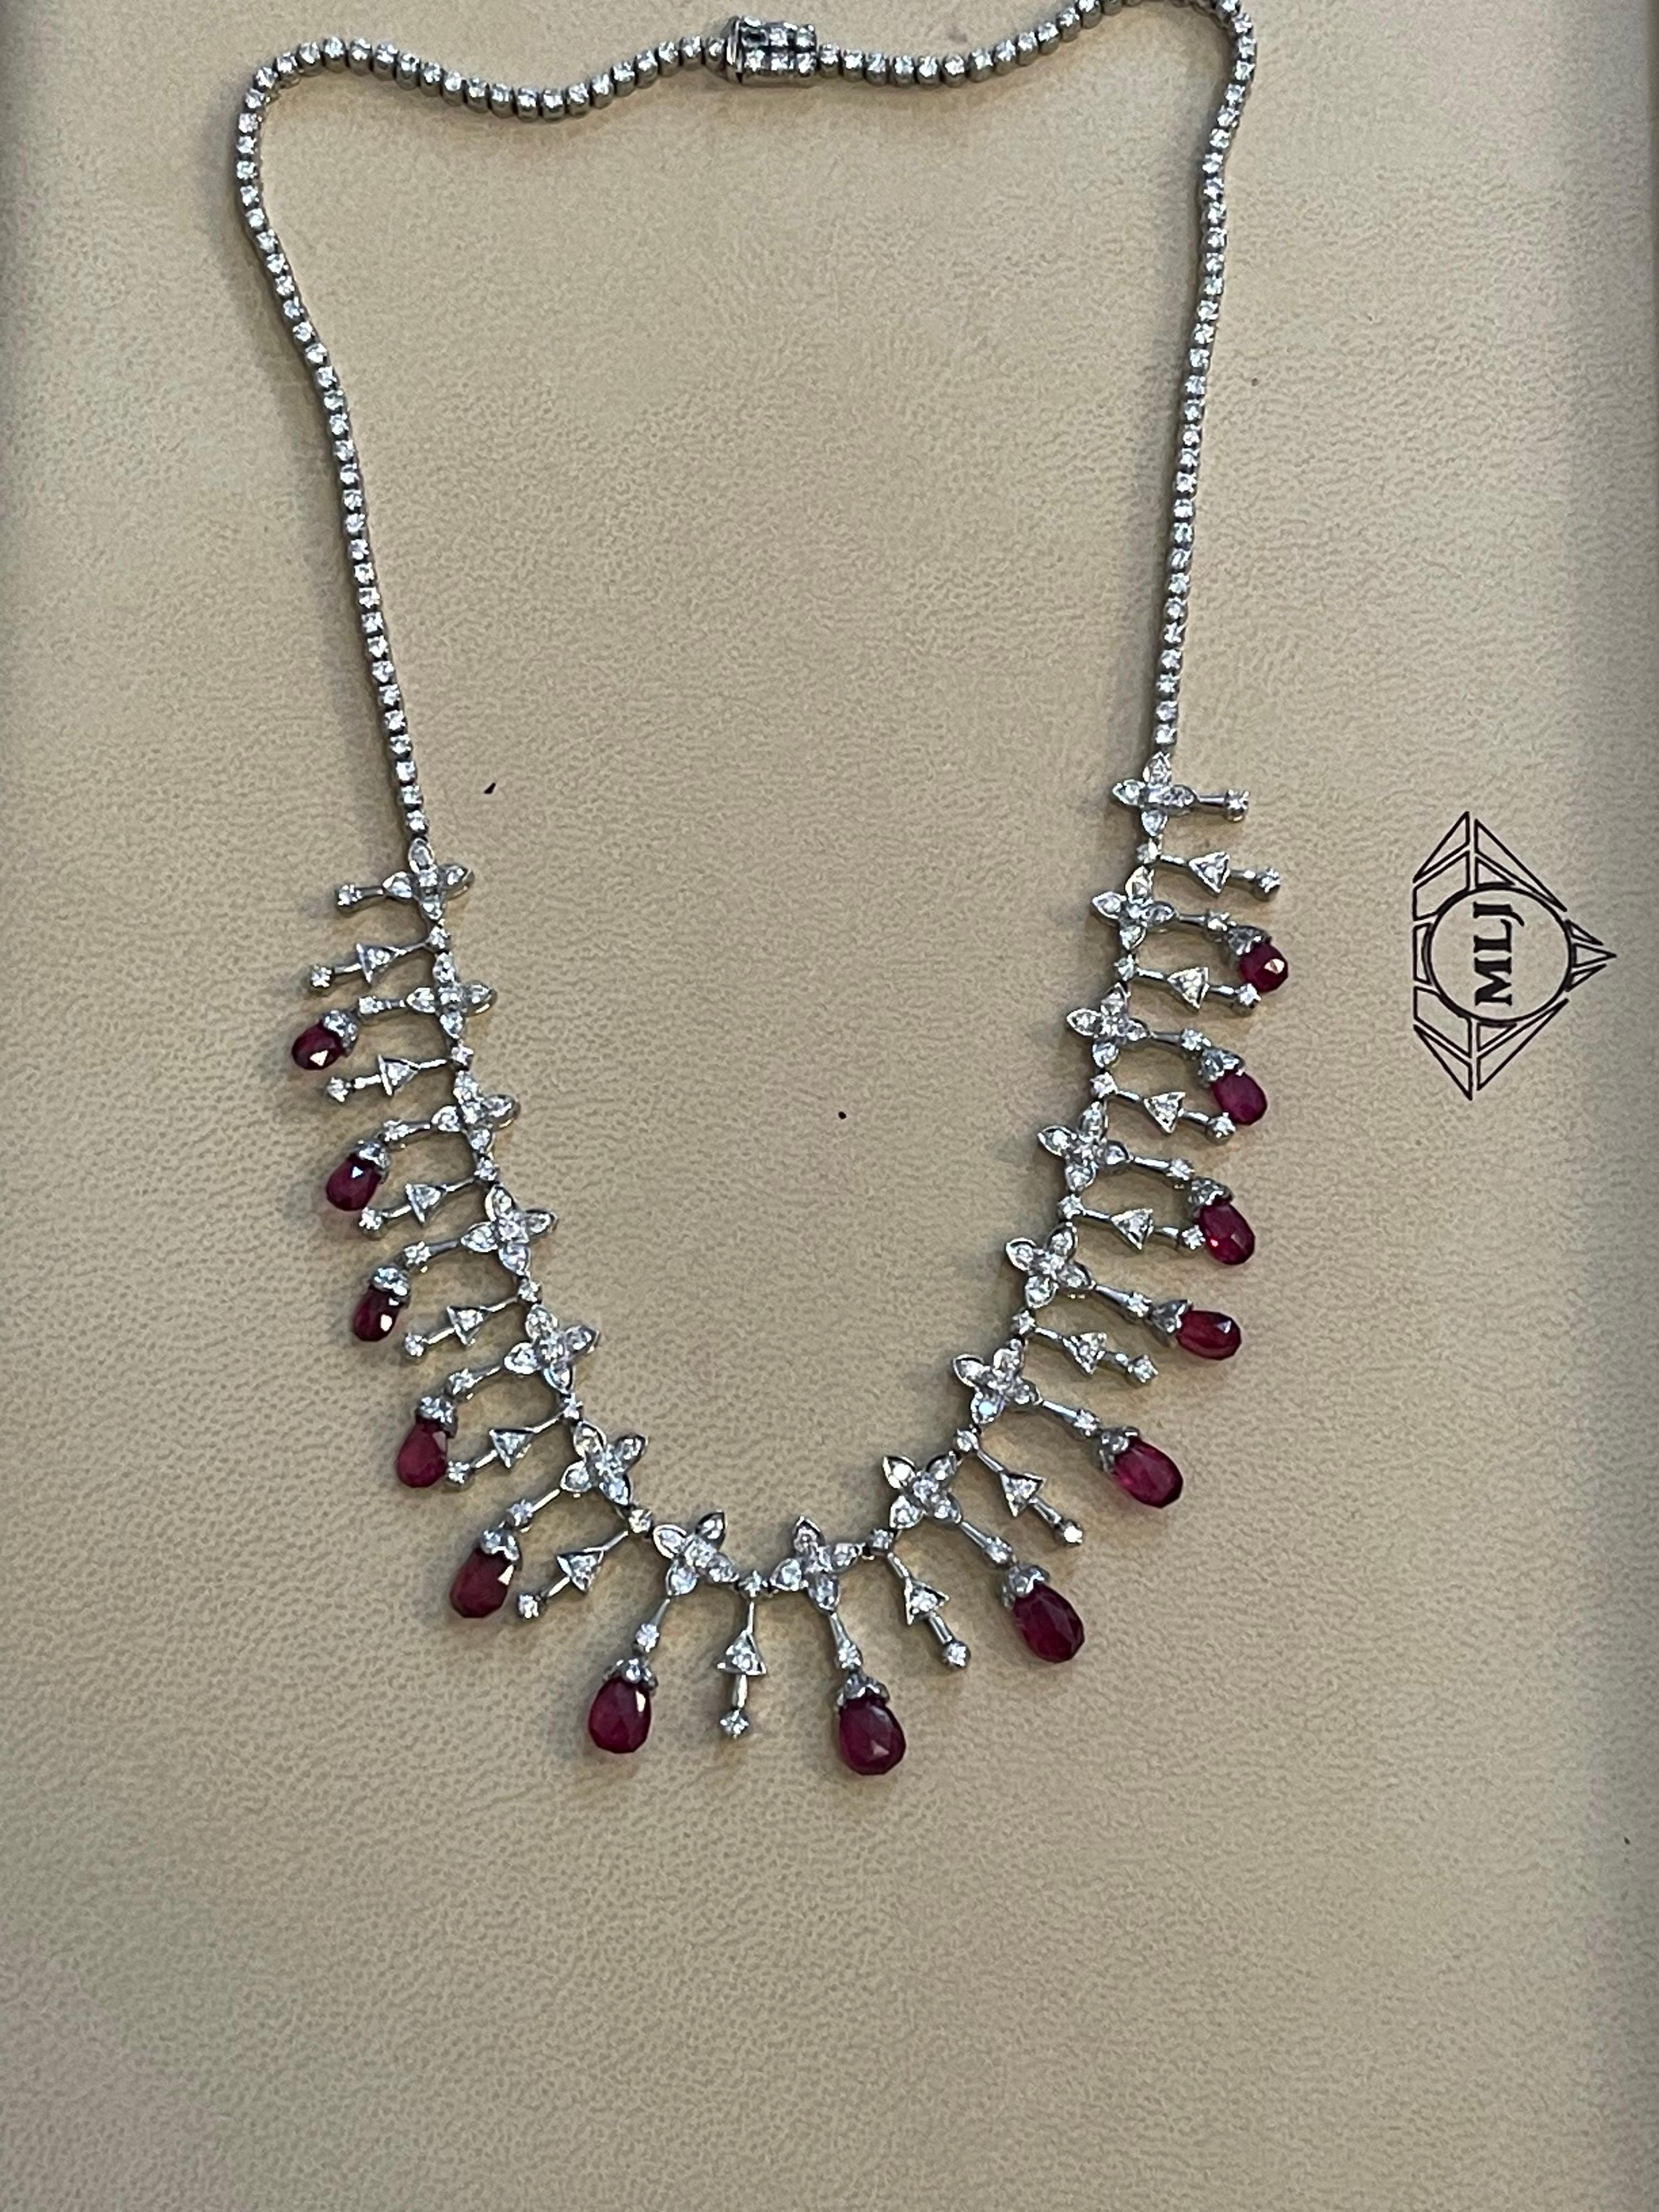 Natural Ruby Briolettes and Diamond Necklace 18 Karat White Gold, Estate 2